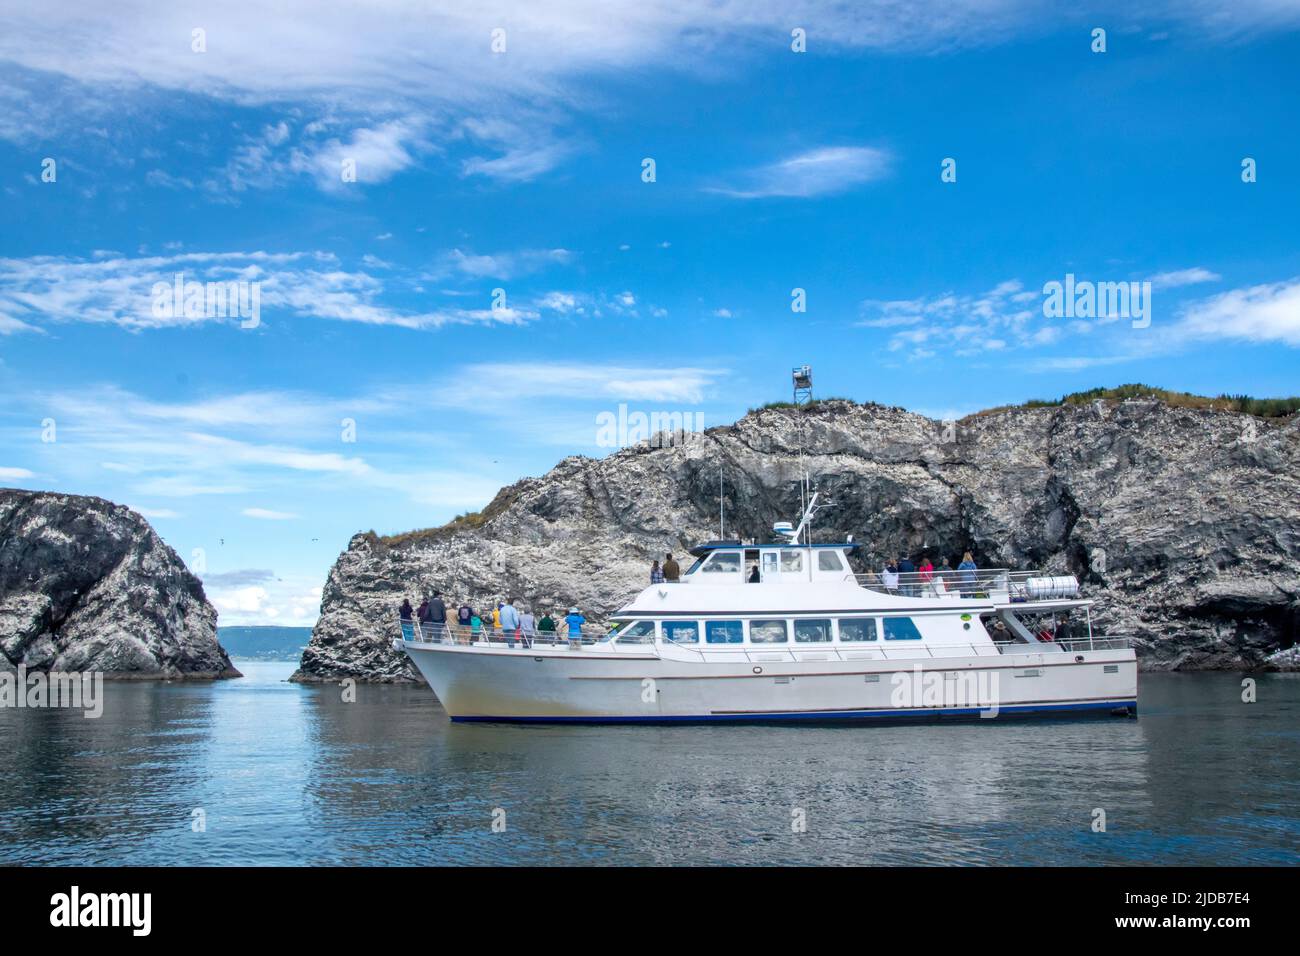 The Discovery, a tour boat based in Homer, Alaska, takes birdwatchers to the Gull Island seabird rookery in Kachemak Bay. Stock Photo